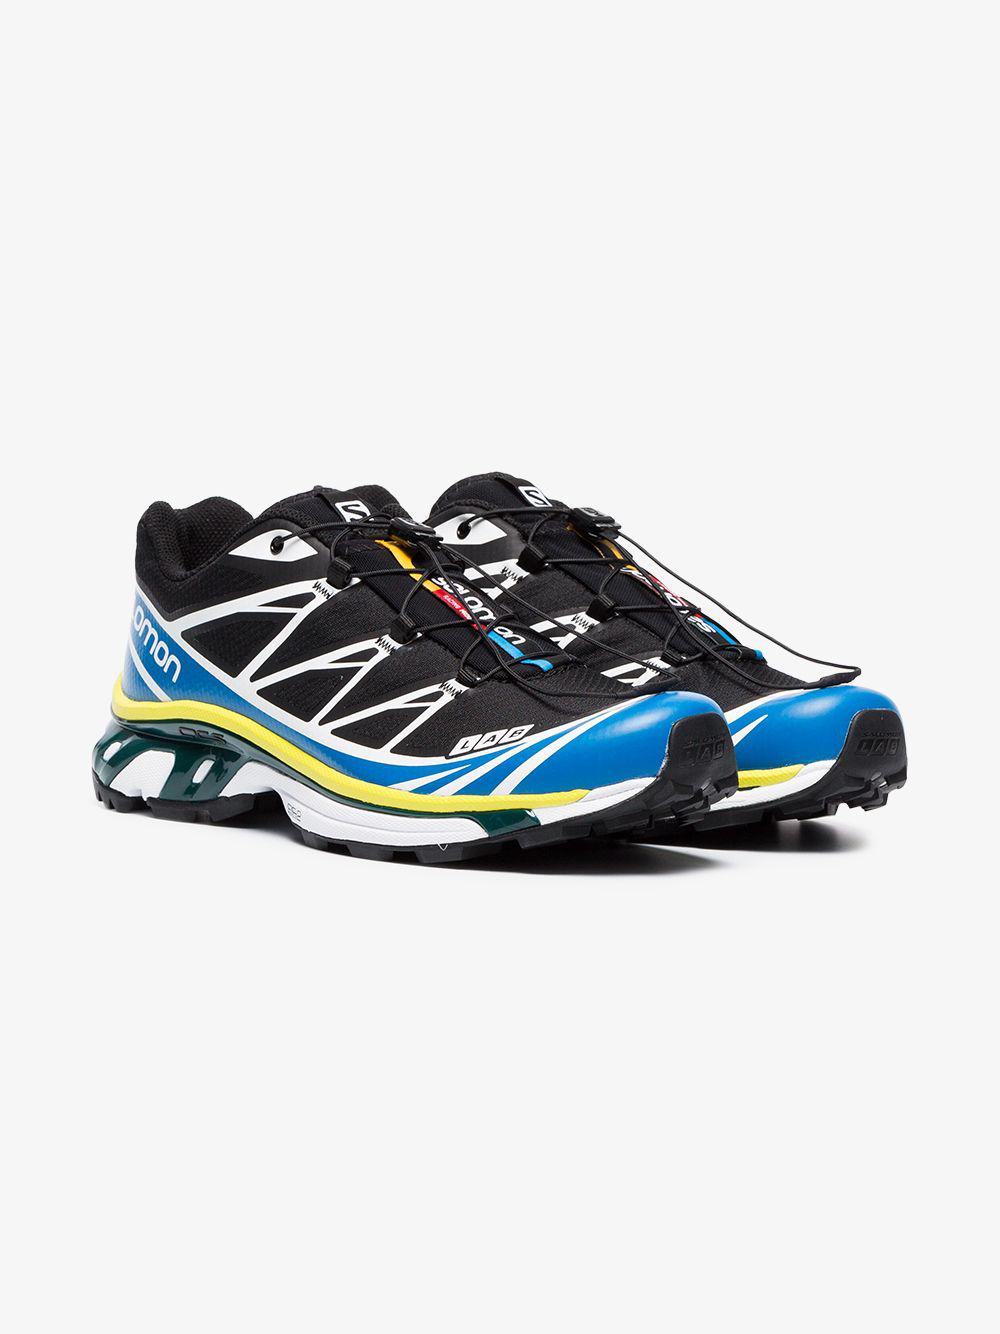 Salomon S/LAB Synthetic Black, Yellow And Blue Xt-6 Adv Sneakers for Men -  Lyst